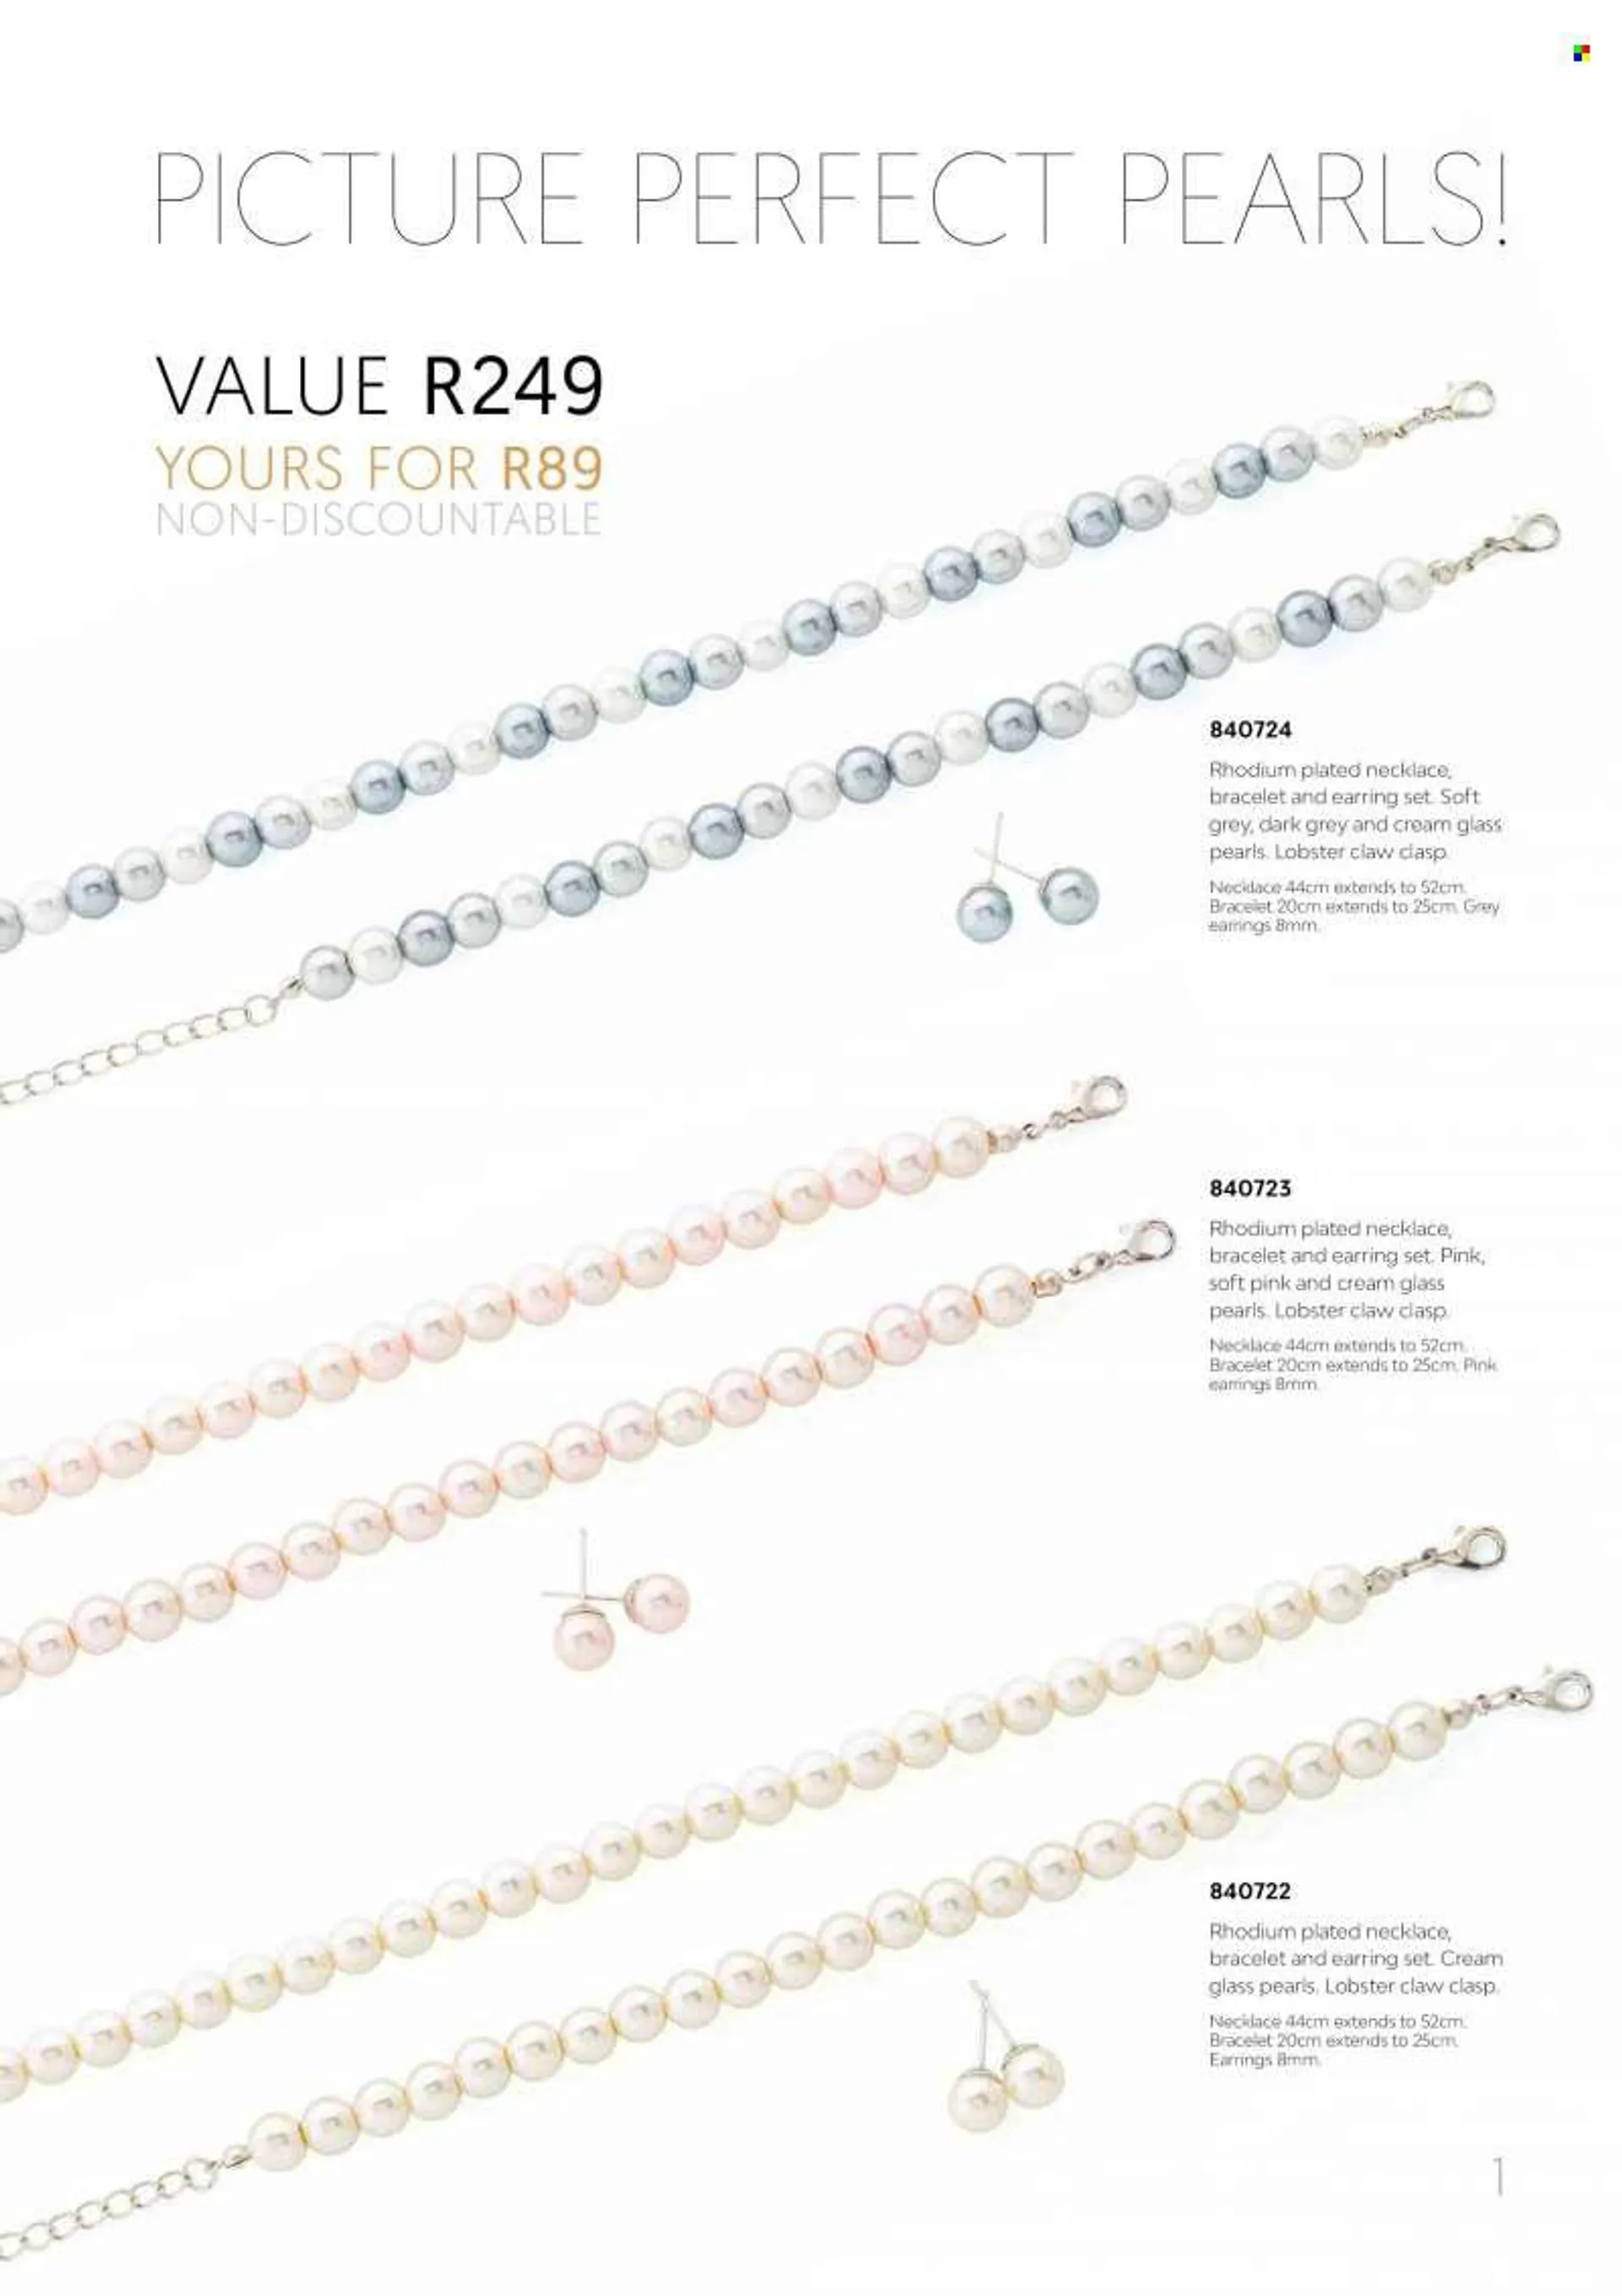 Honey catalogue  - Sales products - bracelet, earrings, necklace. Page 3.